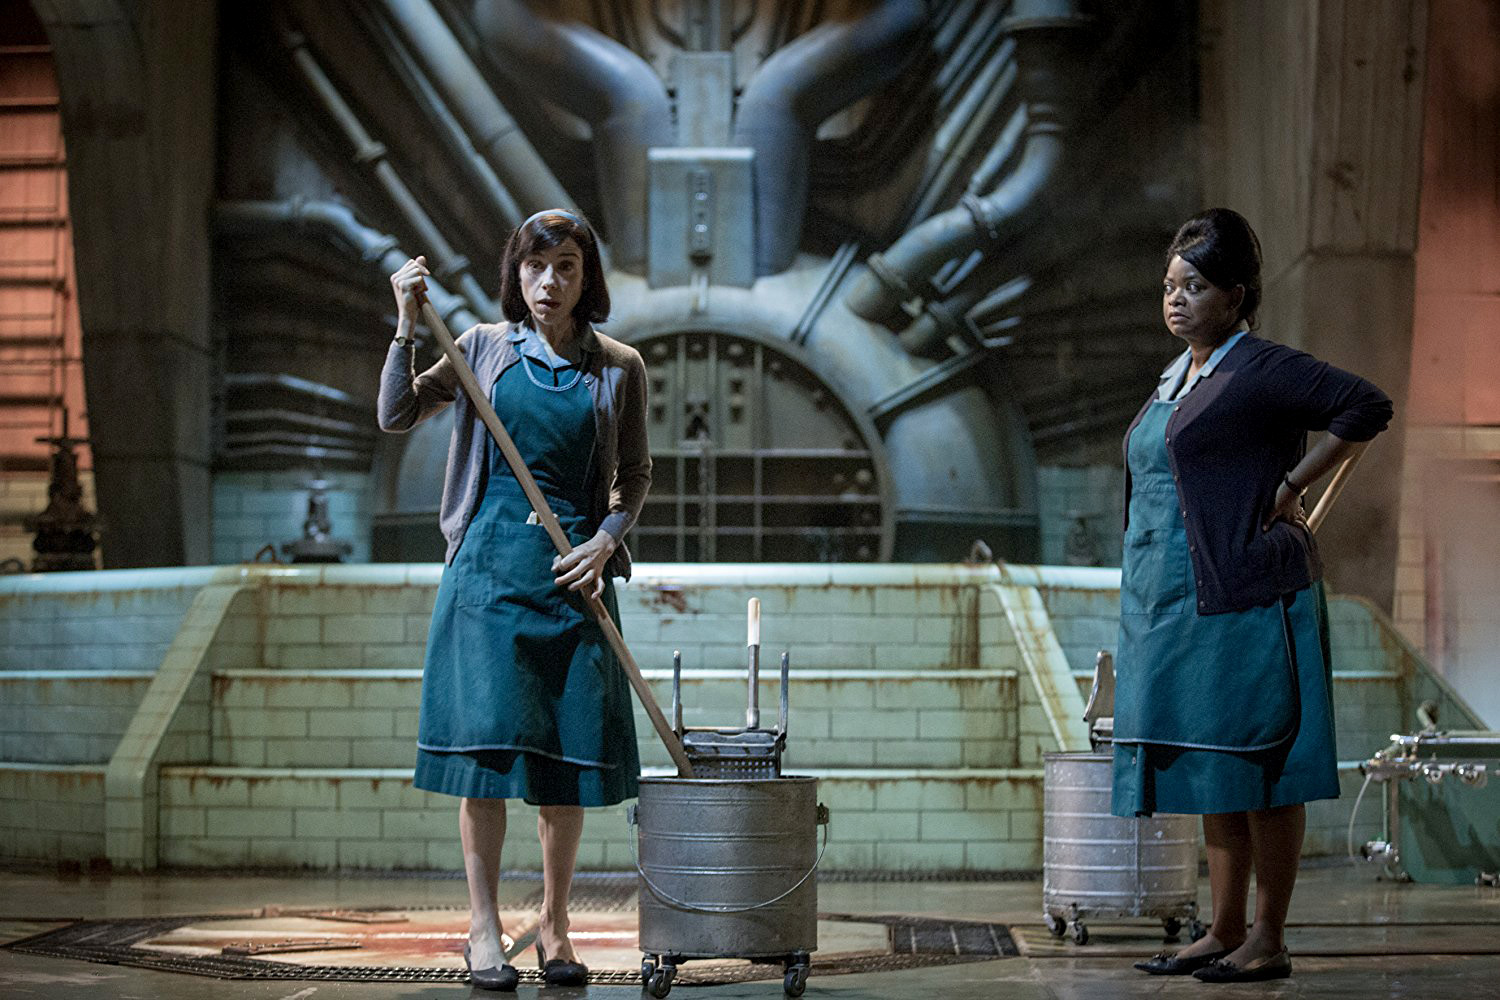 PHOTO: Sally Hawkins, left, and Octavia Spencer in a scene from "The Shape of Water."